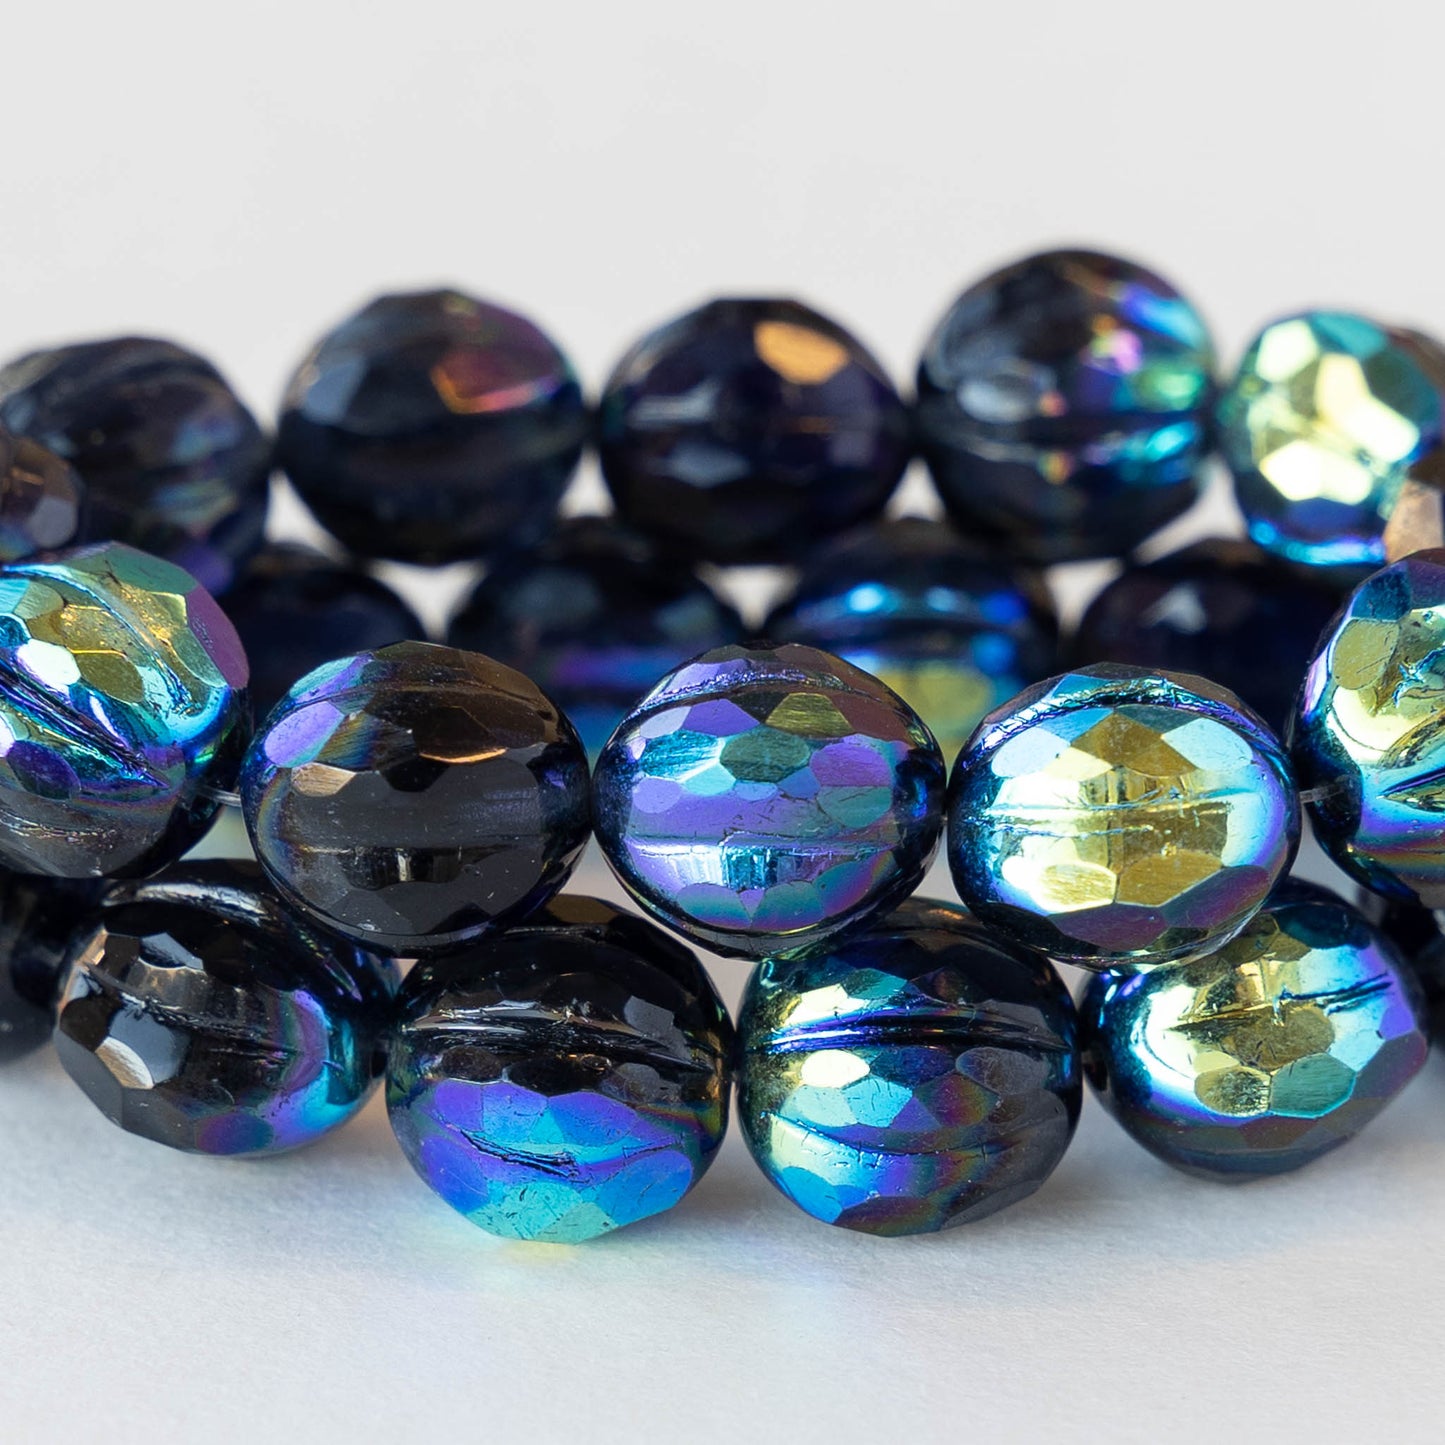 10mm Faceted Melon Beads - Black AB - 12